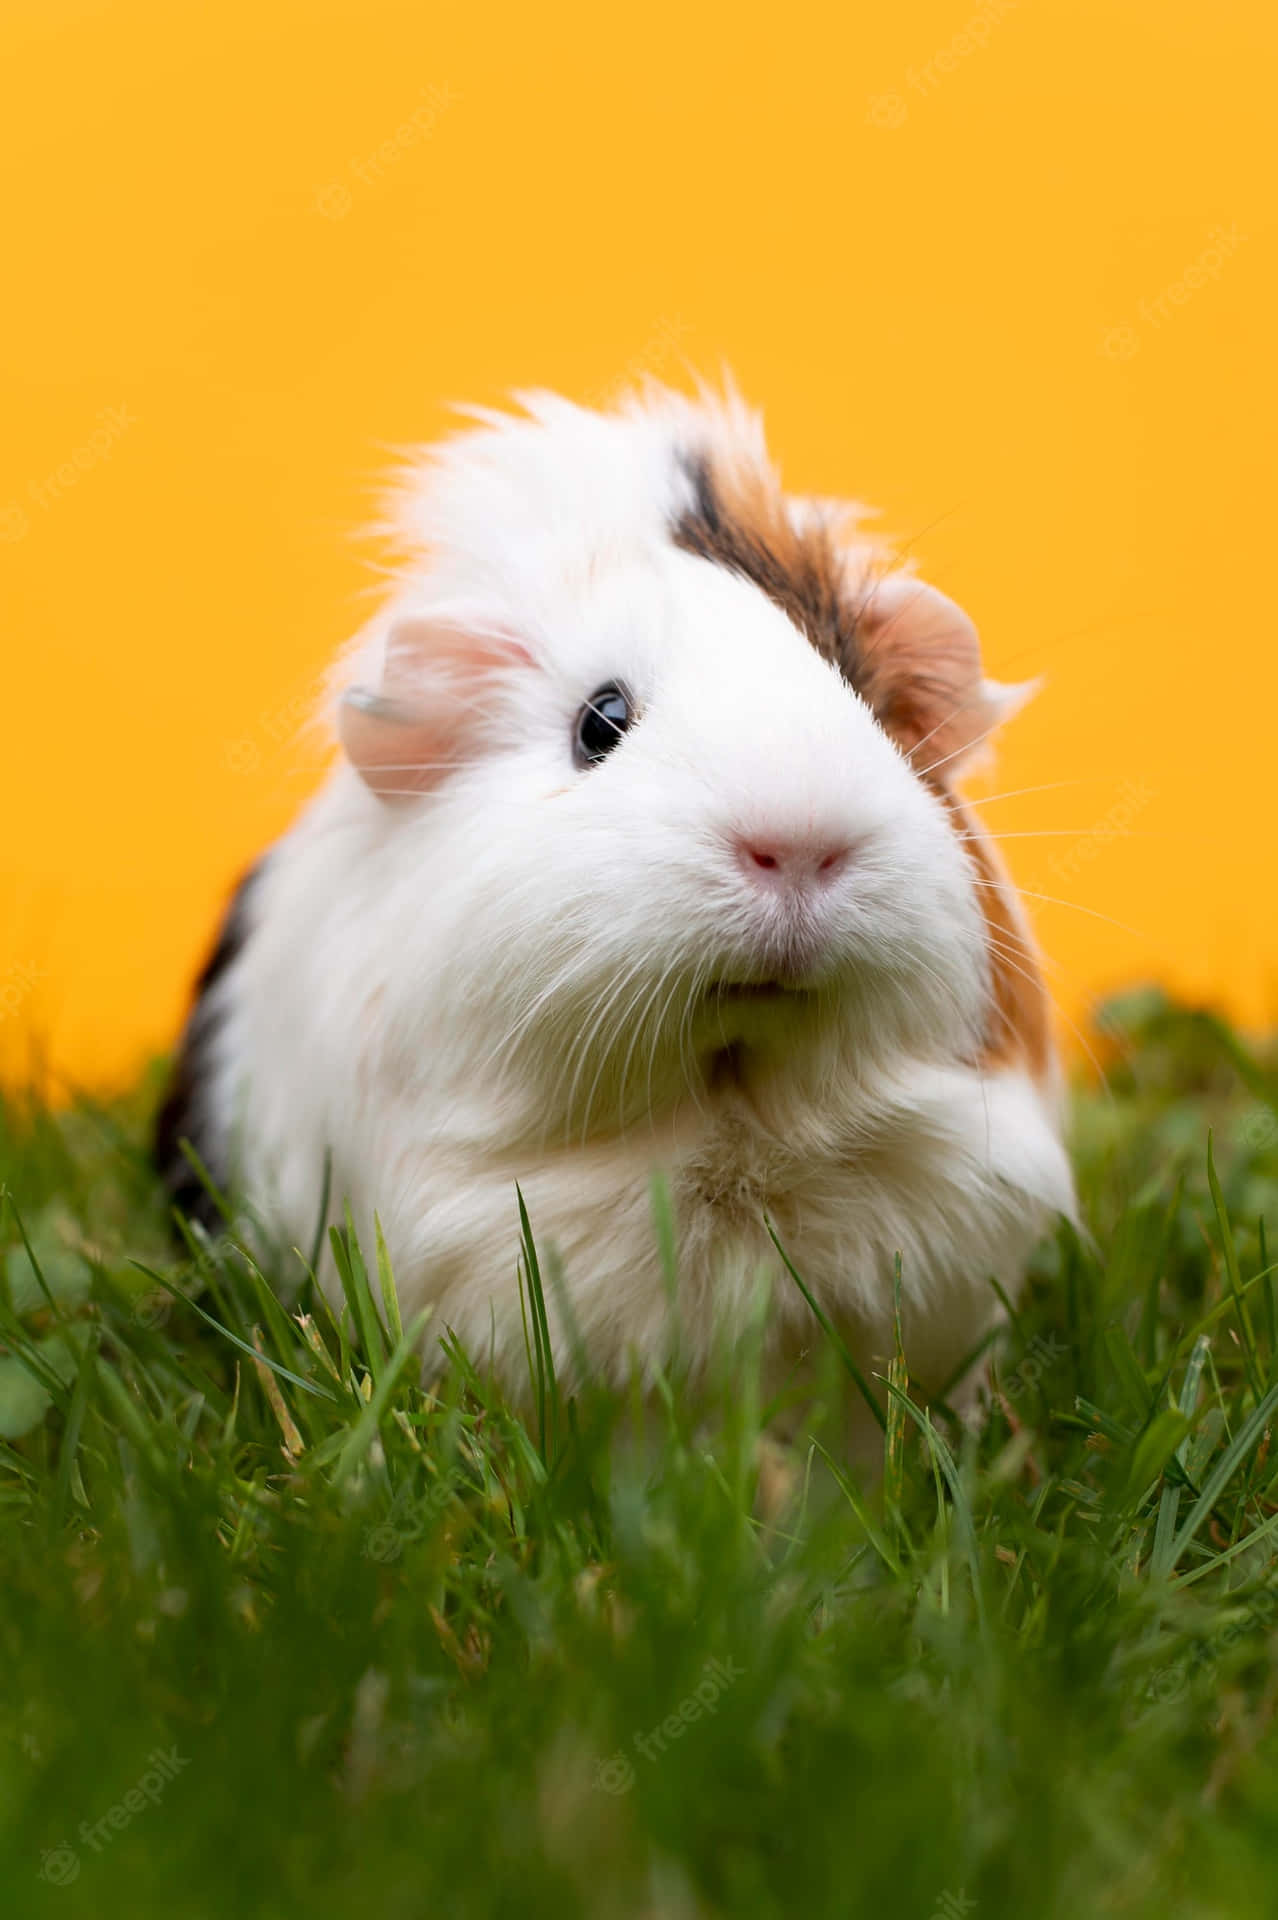 A Guinea Pig Sitting On Grass